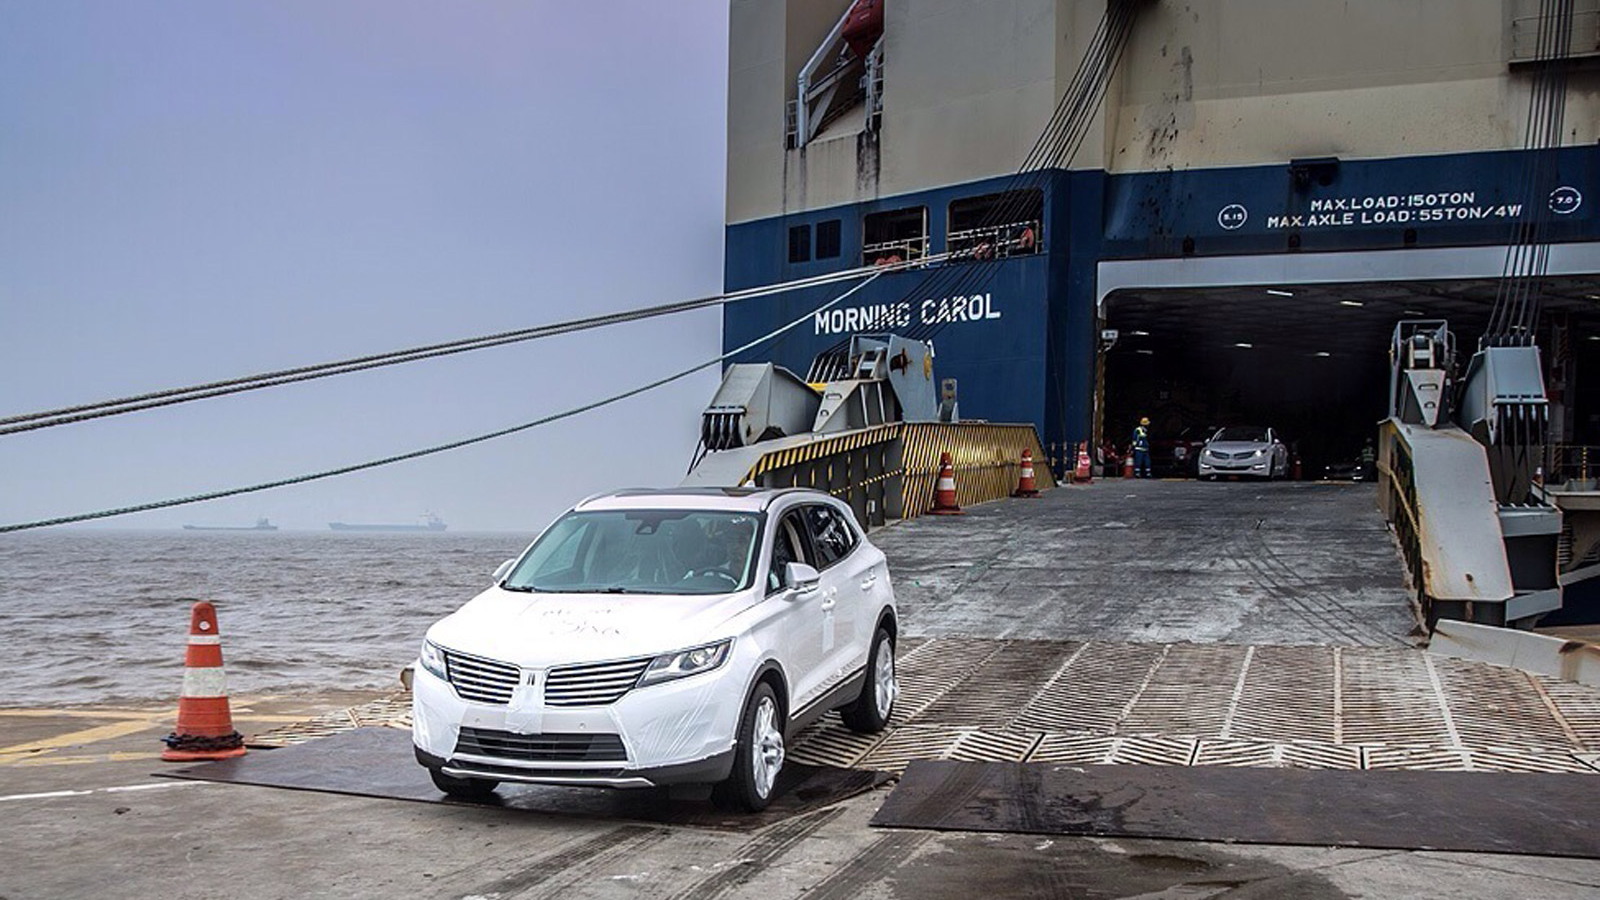 2015 Lincoln MKC driven off a container ship at a port in China